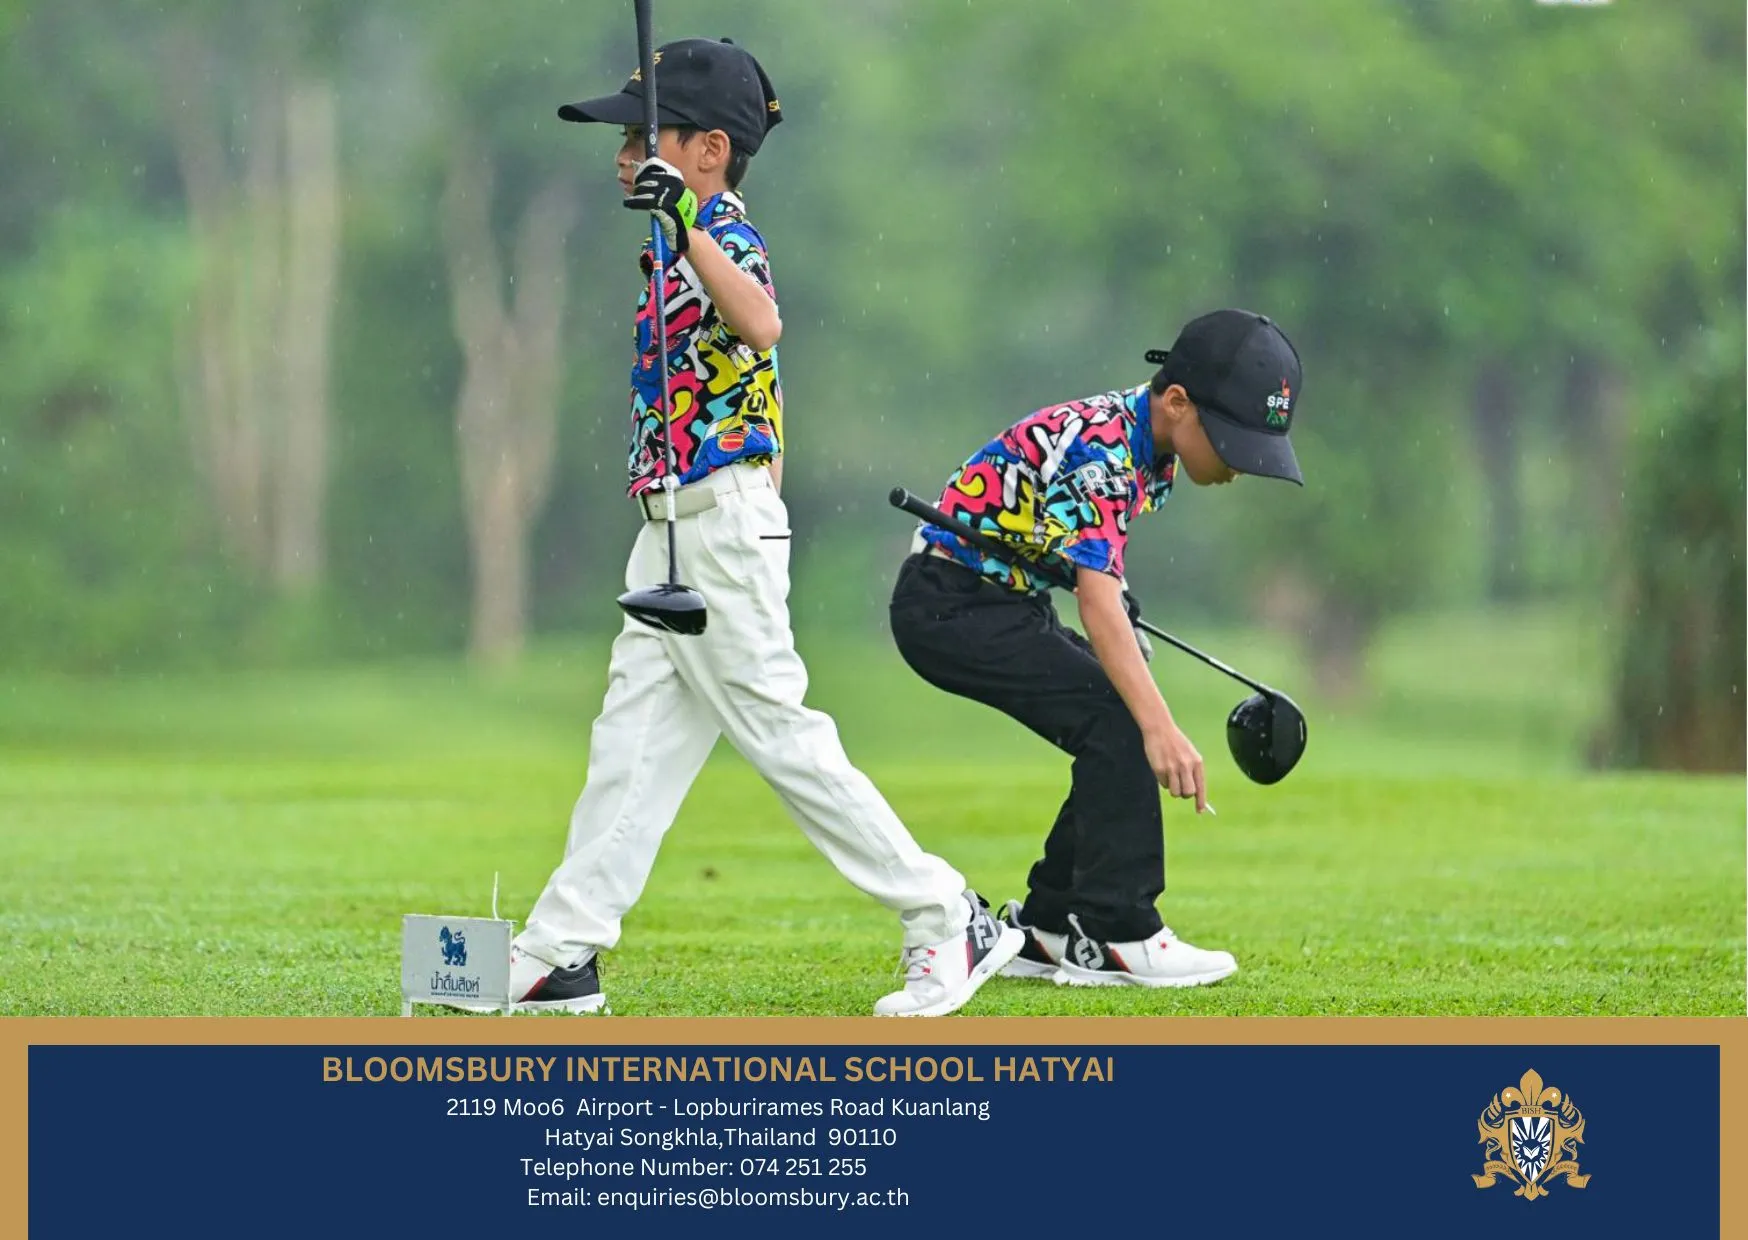 Gun placed 2nd and Golf ranked 5th in the TGA-SINGHA Junior Golf Ranking 2024-2025